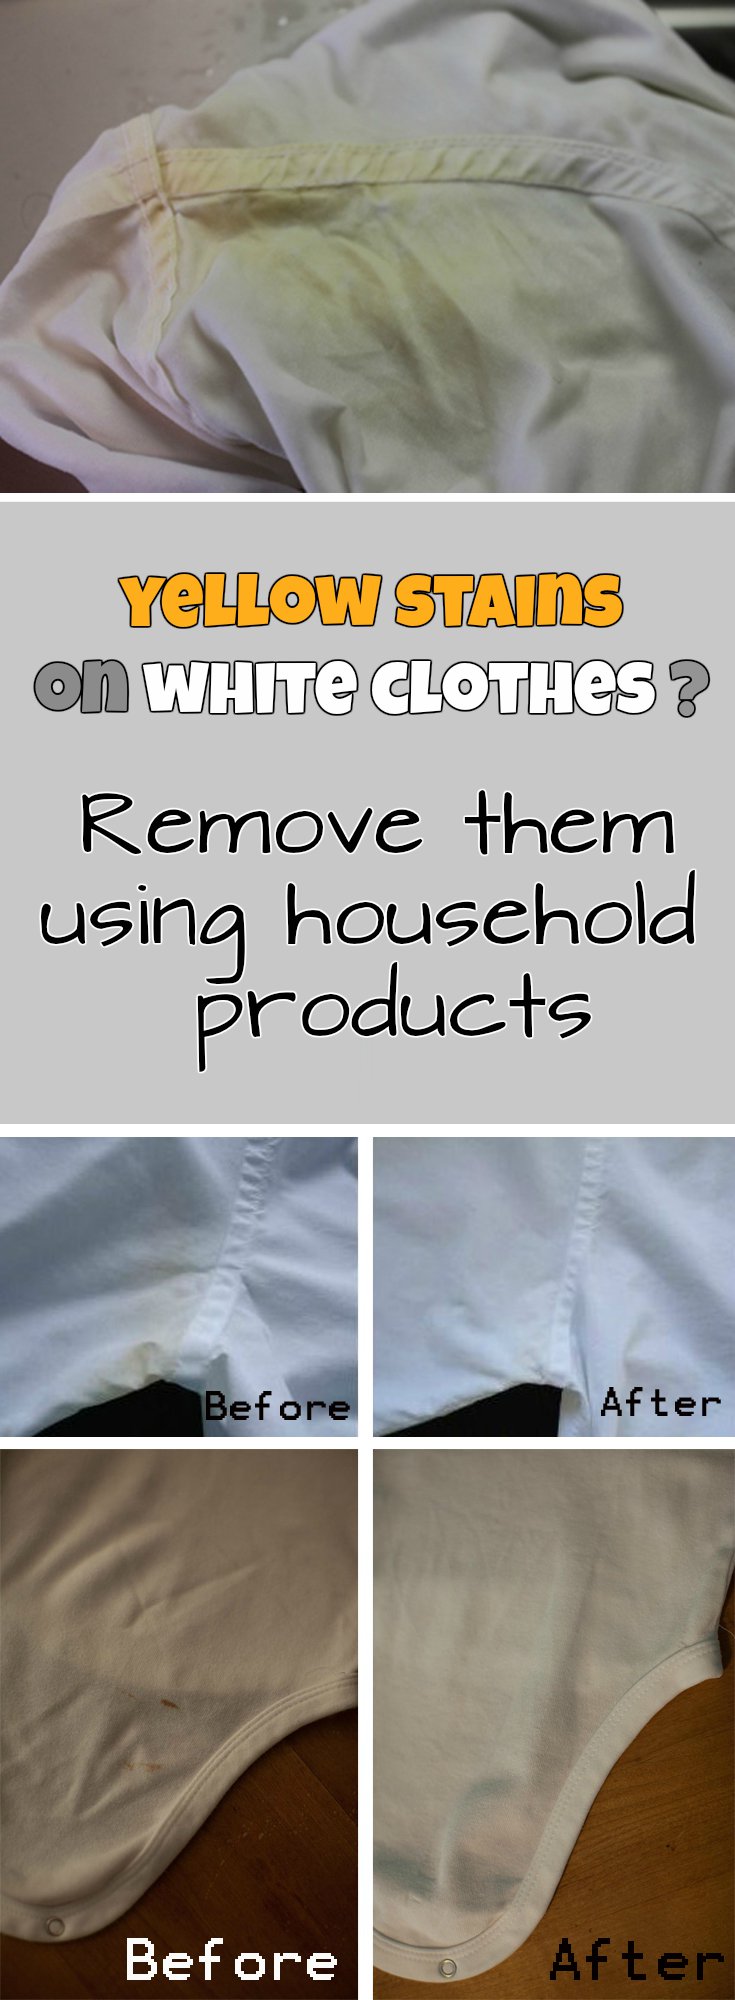 Yellow stains on white clothes? Remove them using